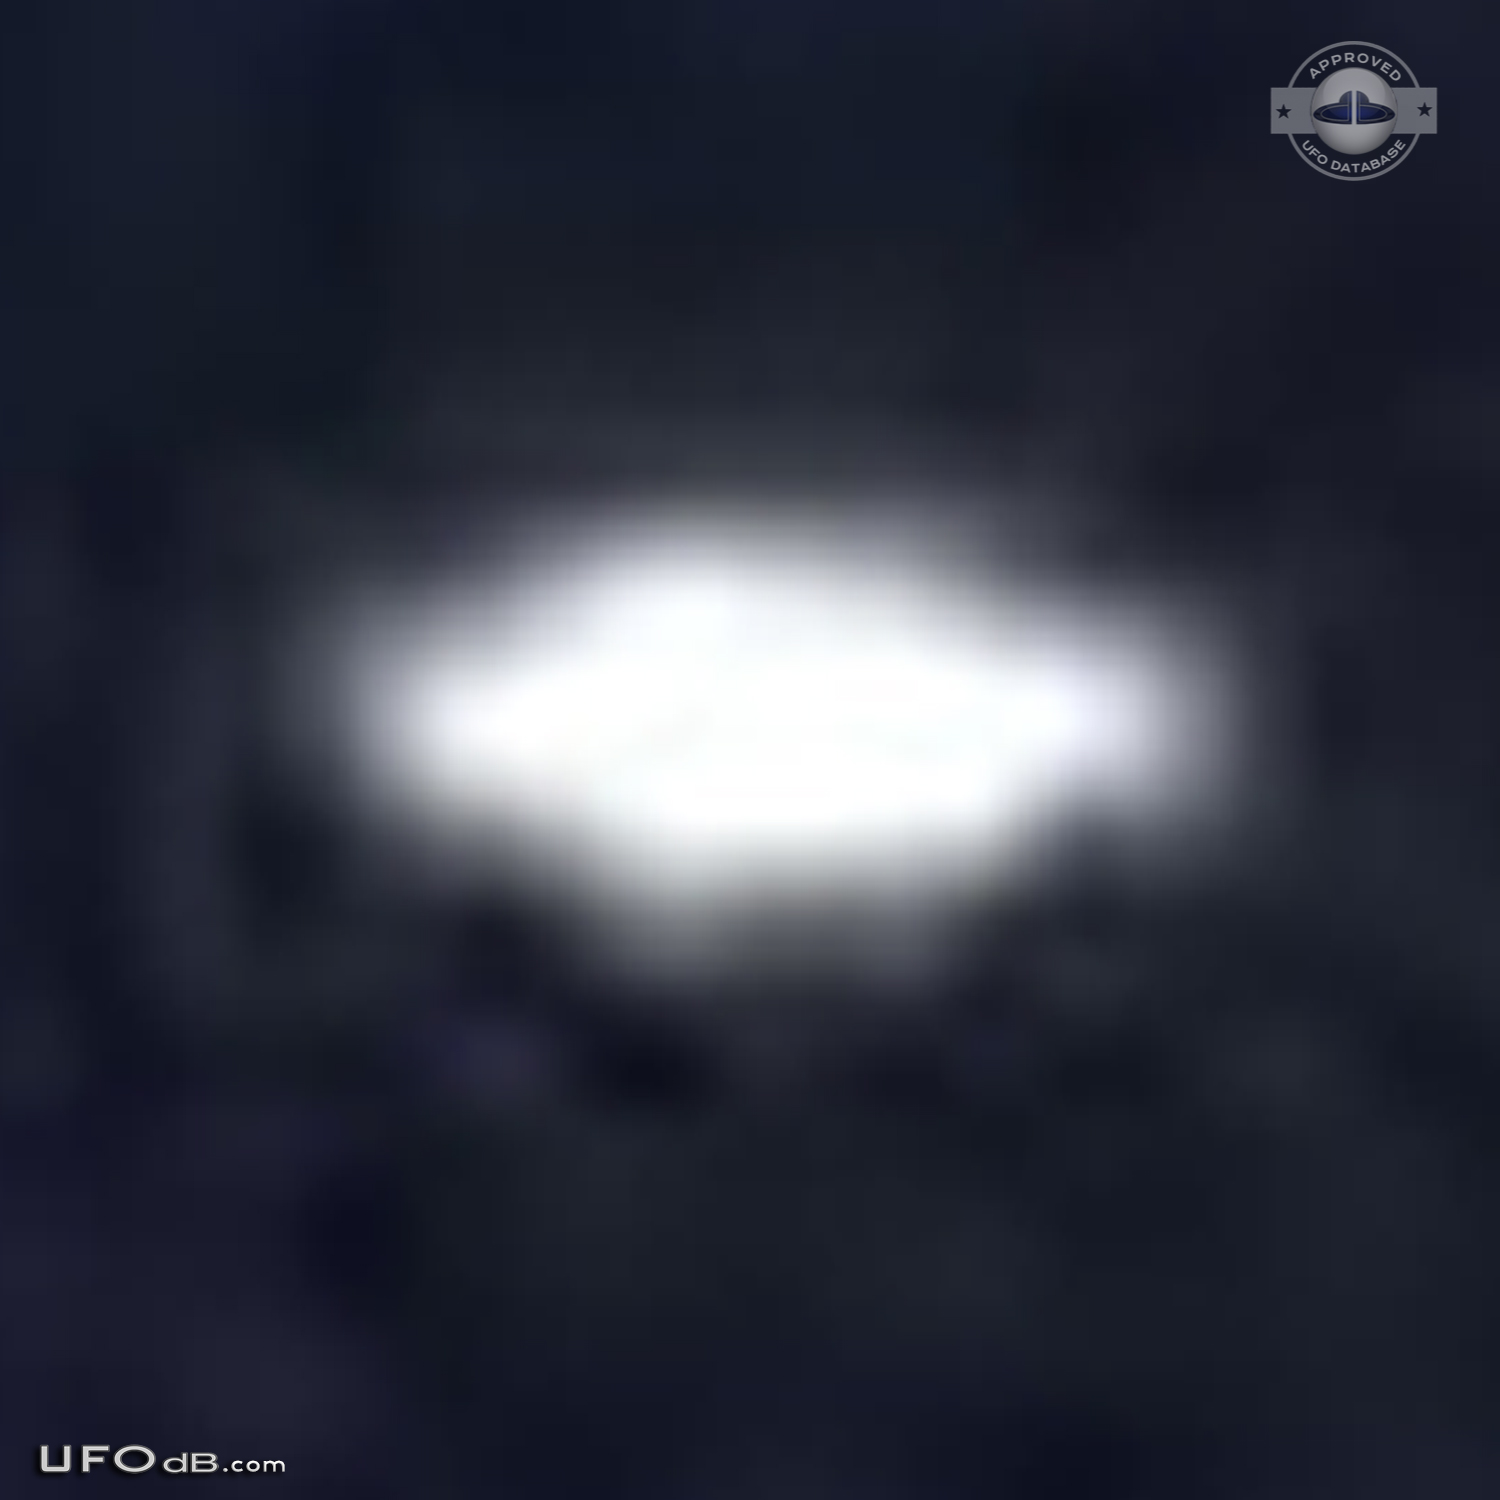 Saucer UFO picture seen over Euless Texas sent to TV station - 2013 UFO Picture #542-4